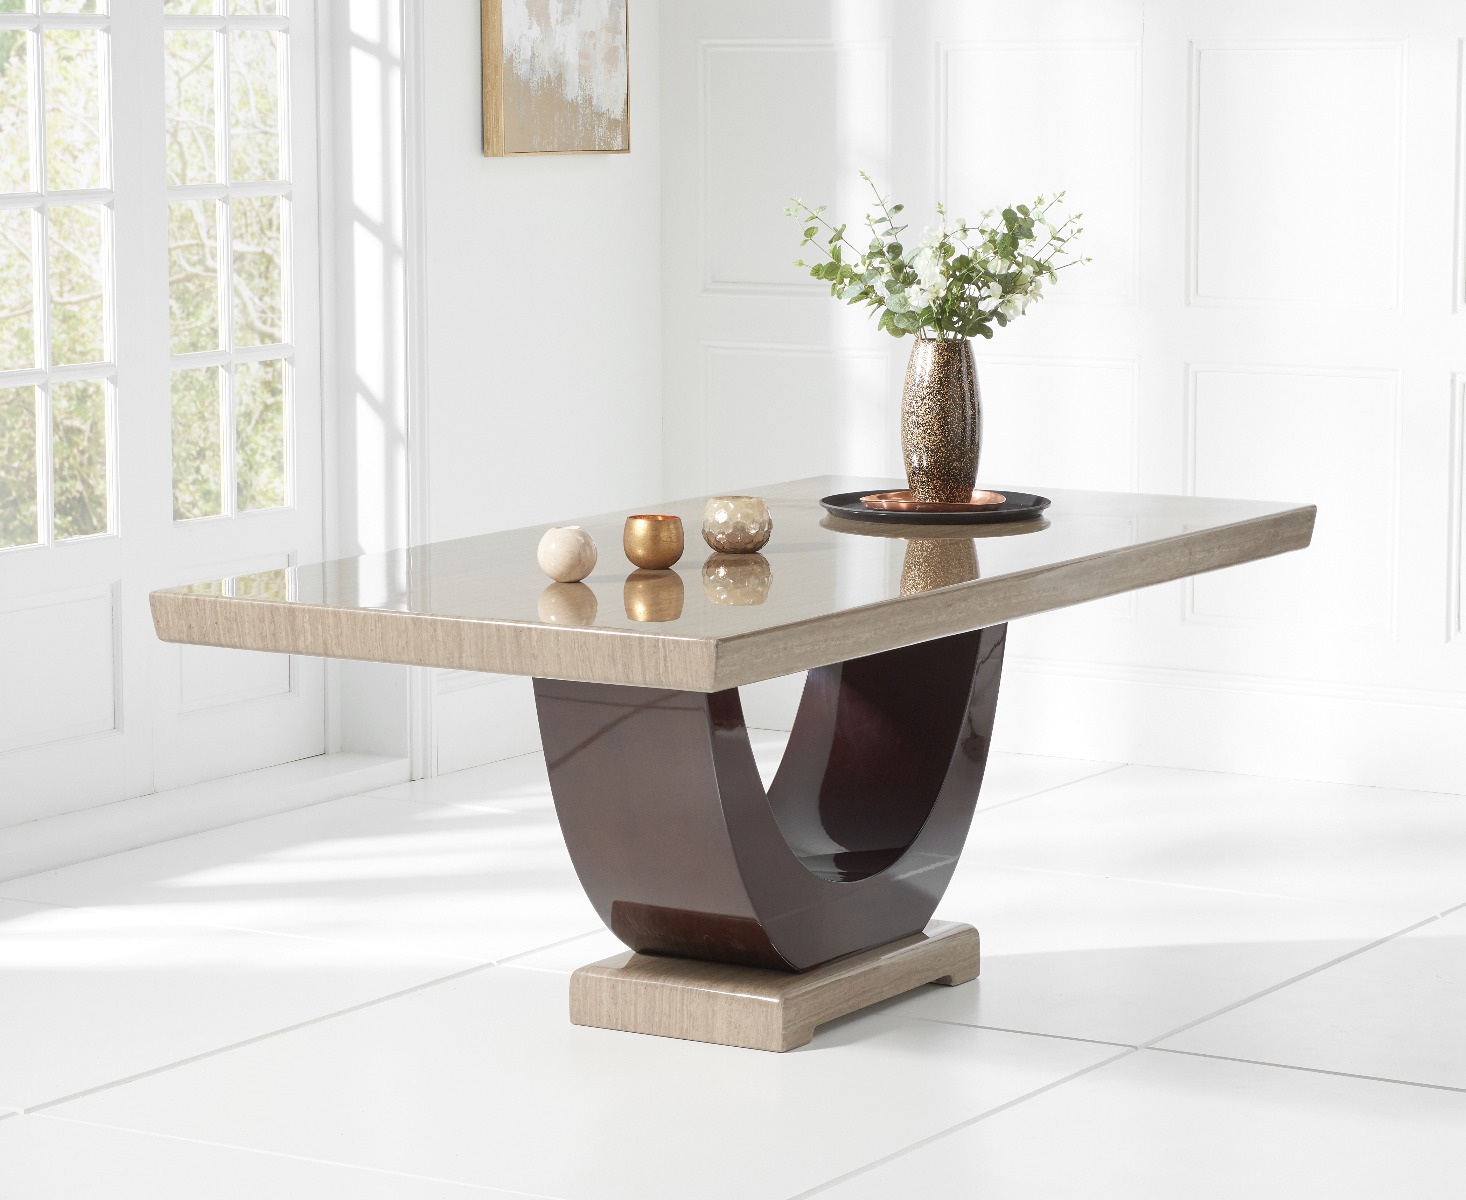 Photo 2 of Novara 200cm brown pedestal marble dining table with 6 brown alpine chairs